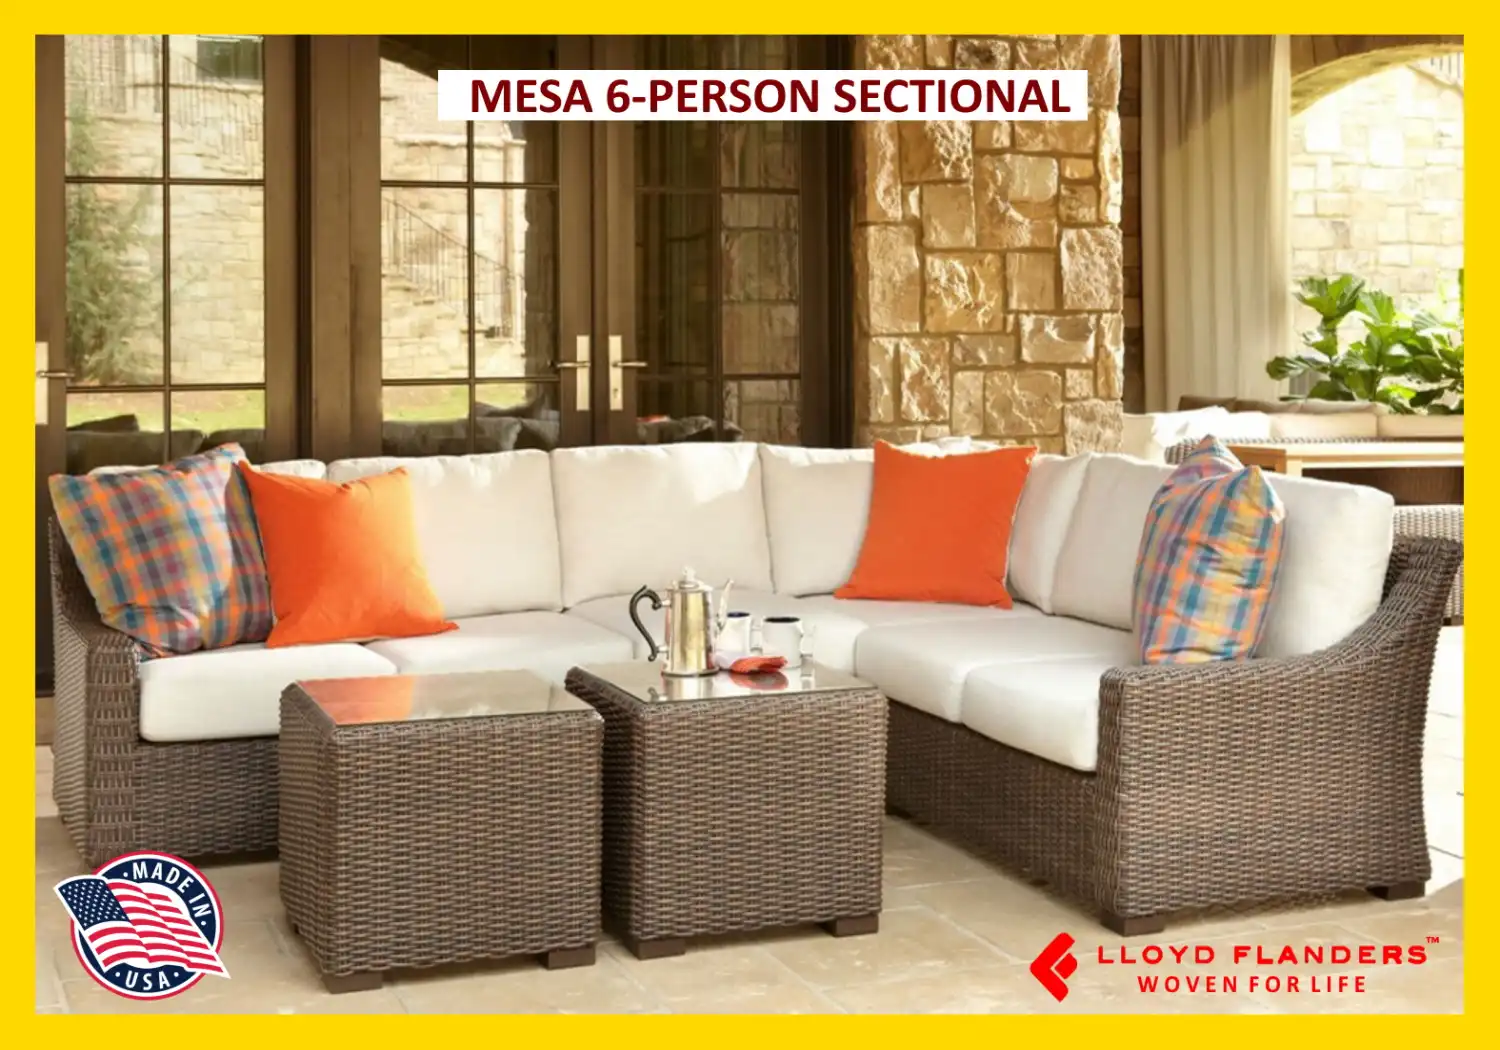 MESA 6-PERSON SECTIONAL